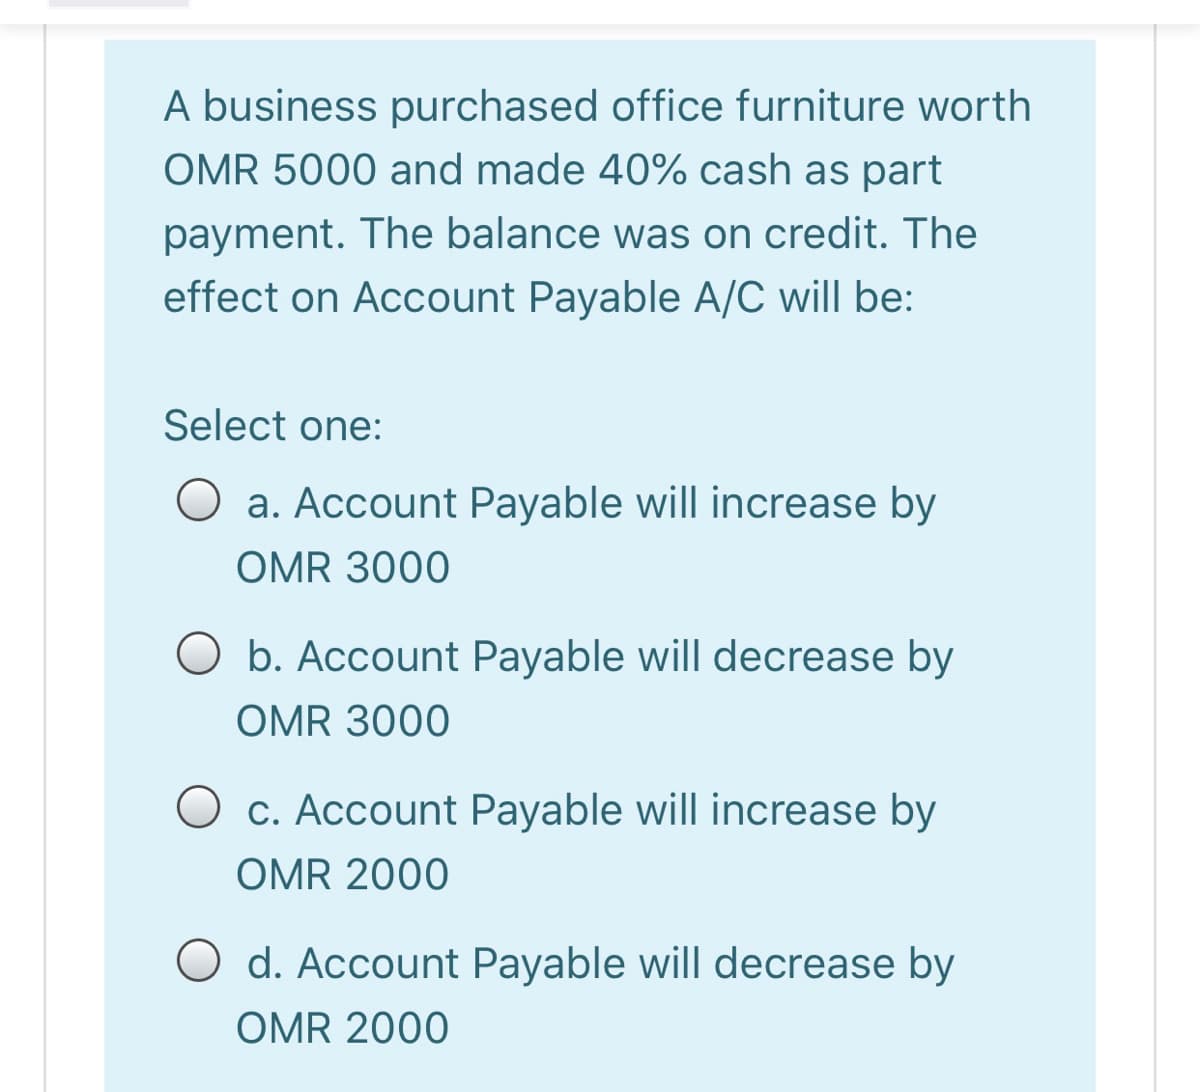 A business purchased office furniture worth
OMR 5000 and made 40% cash as part
payment. The balance was on credit. The
effect on Account Payable A/C will be:
Select one:
a. Account Payable will increase by
OMR 3000
O b. Account Payable will decrease by
OMR 3000
c. Account Payable will increase by
OMR 2000
d. Account Payable will decrease by
OMR 2000
